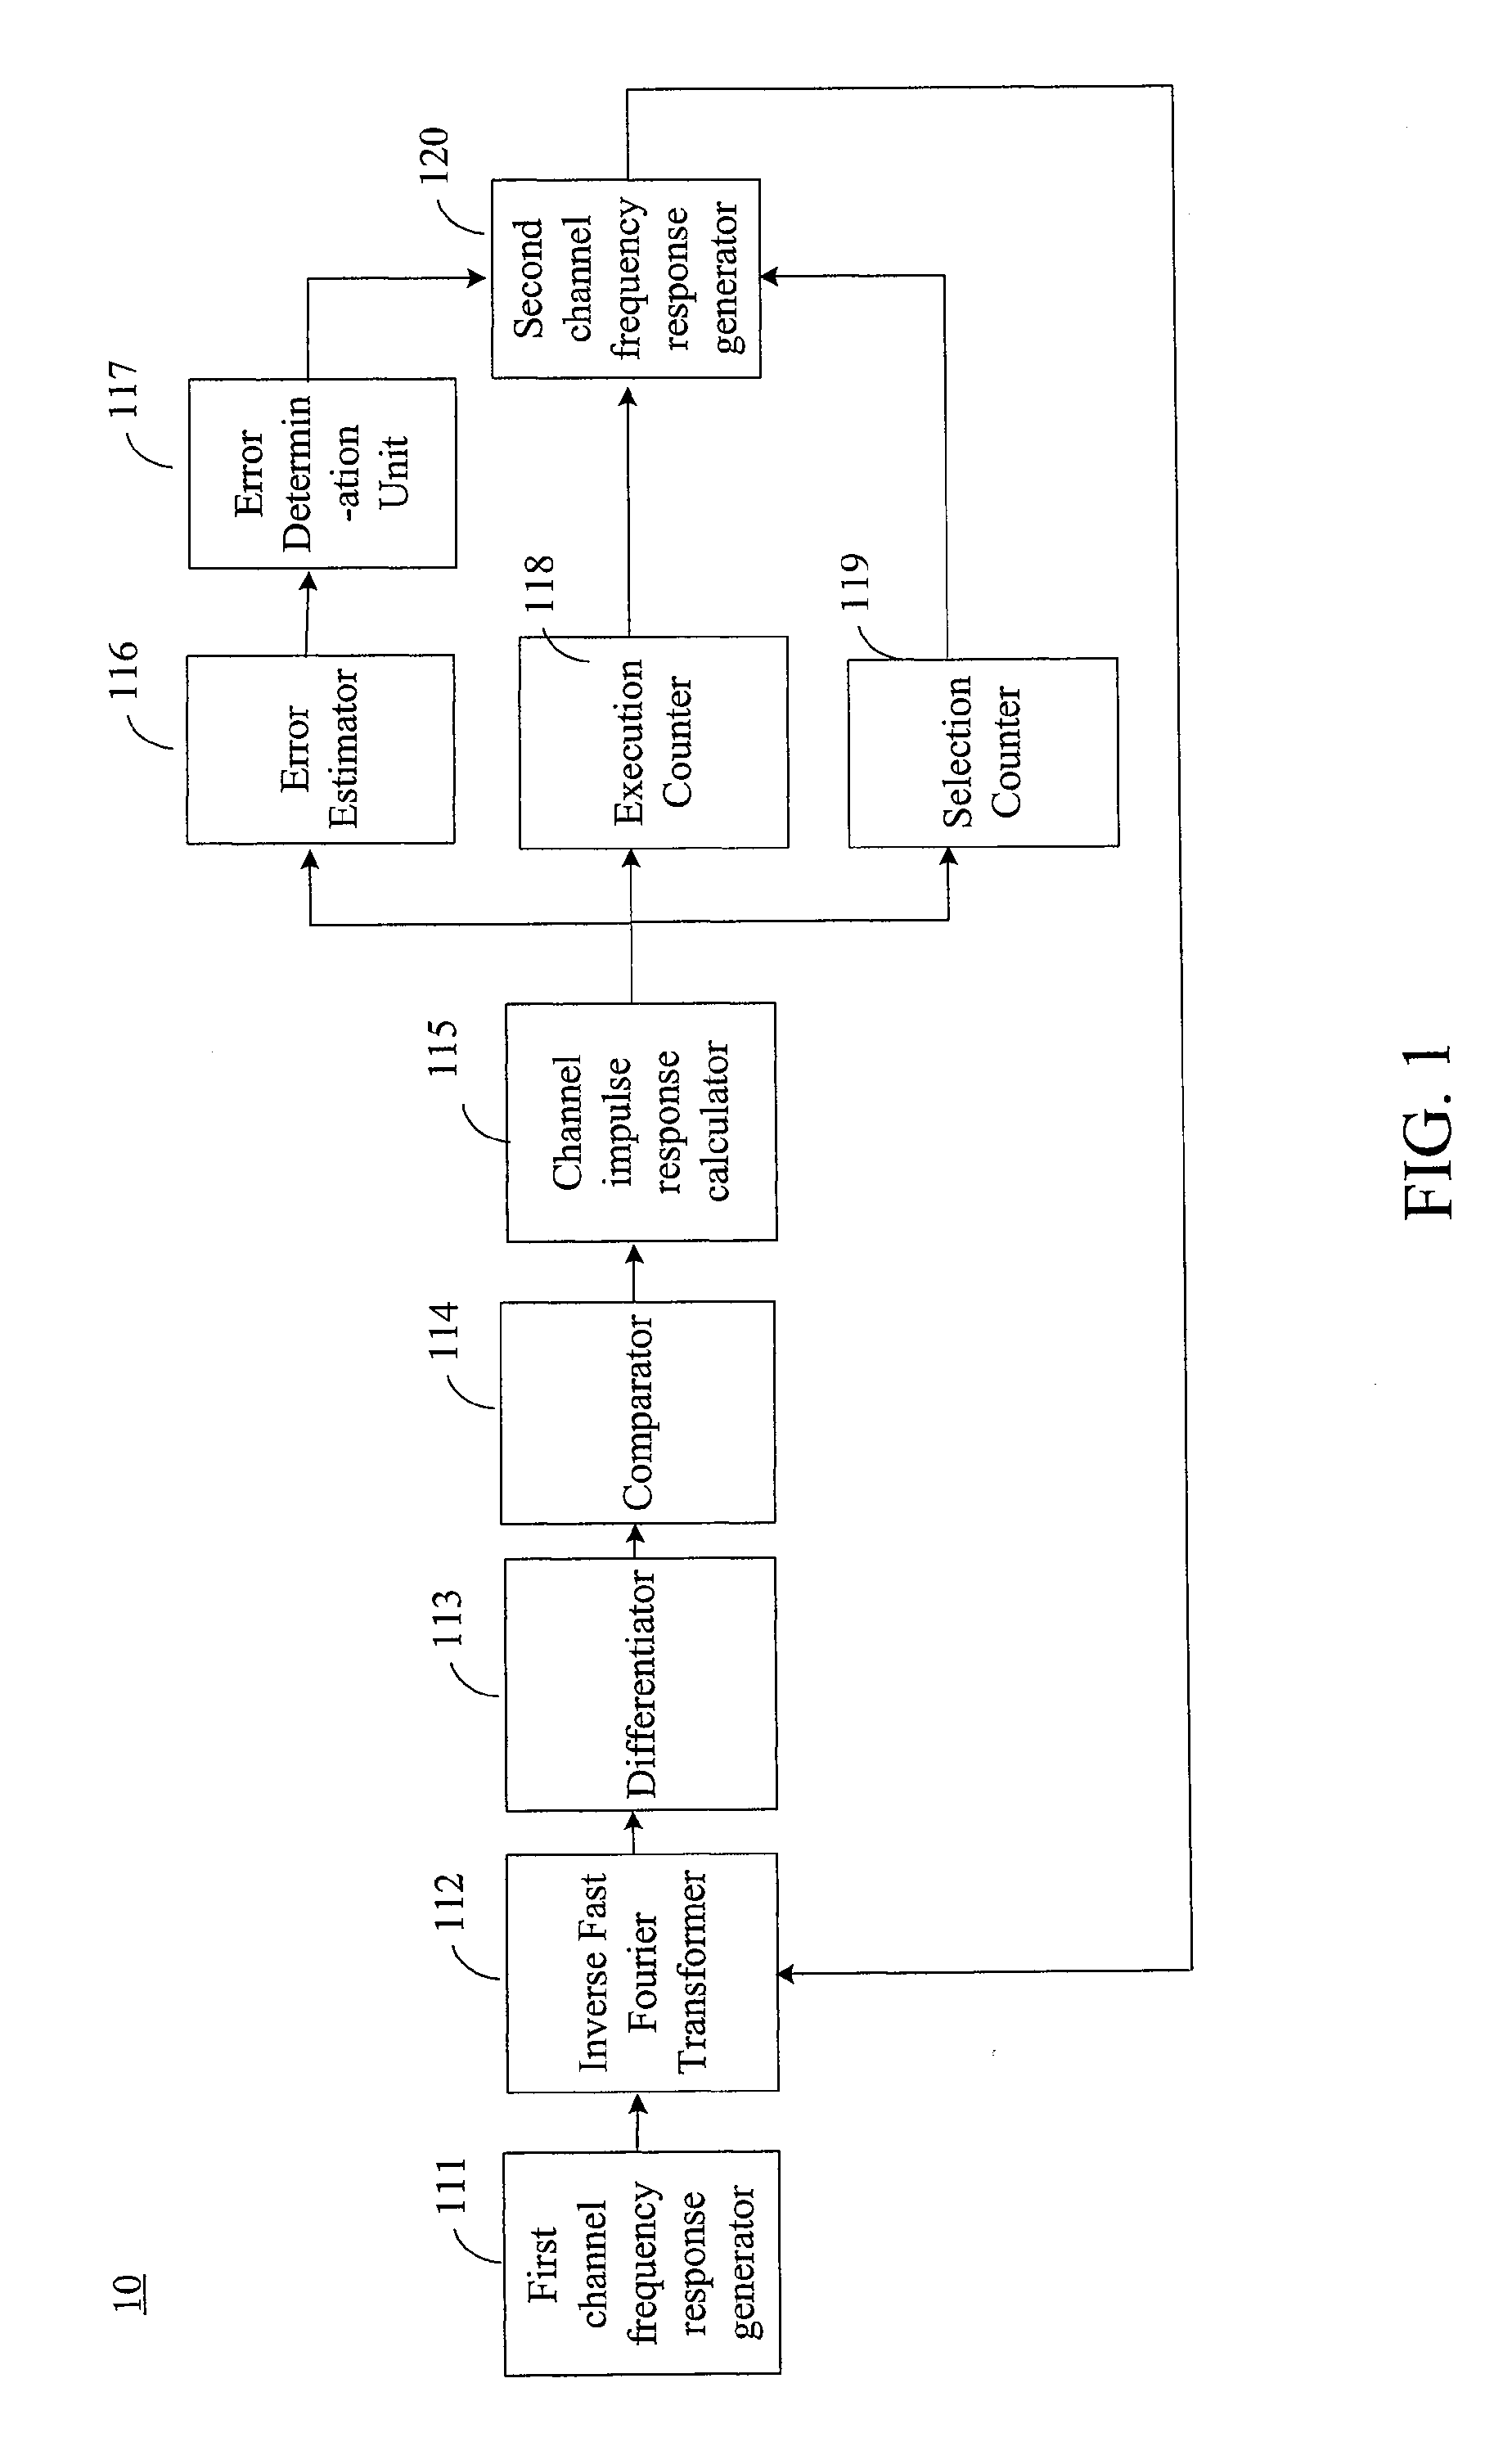 Method and Apparatus for Deciding a Channel Impulse Response